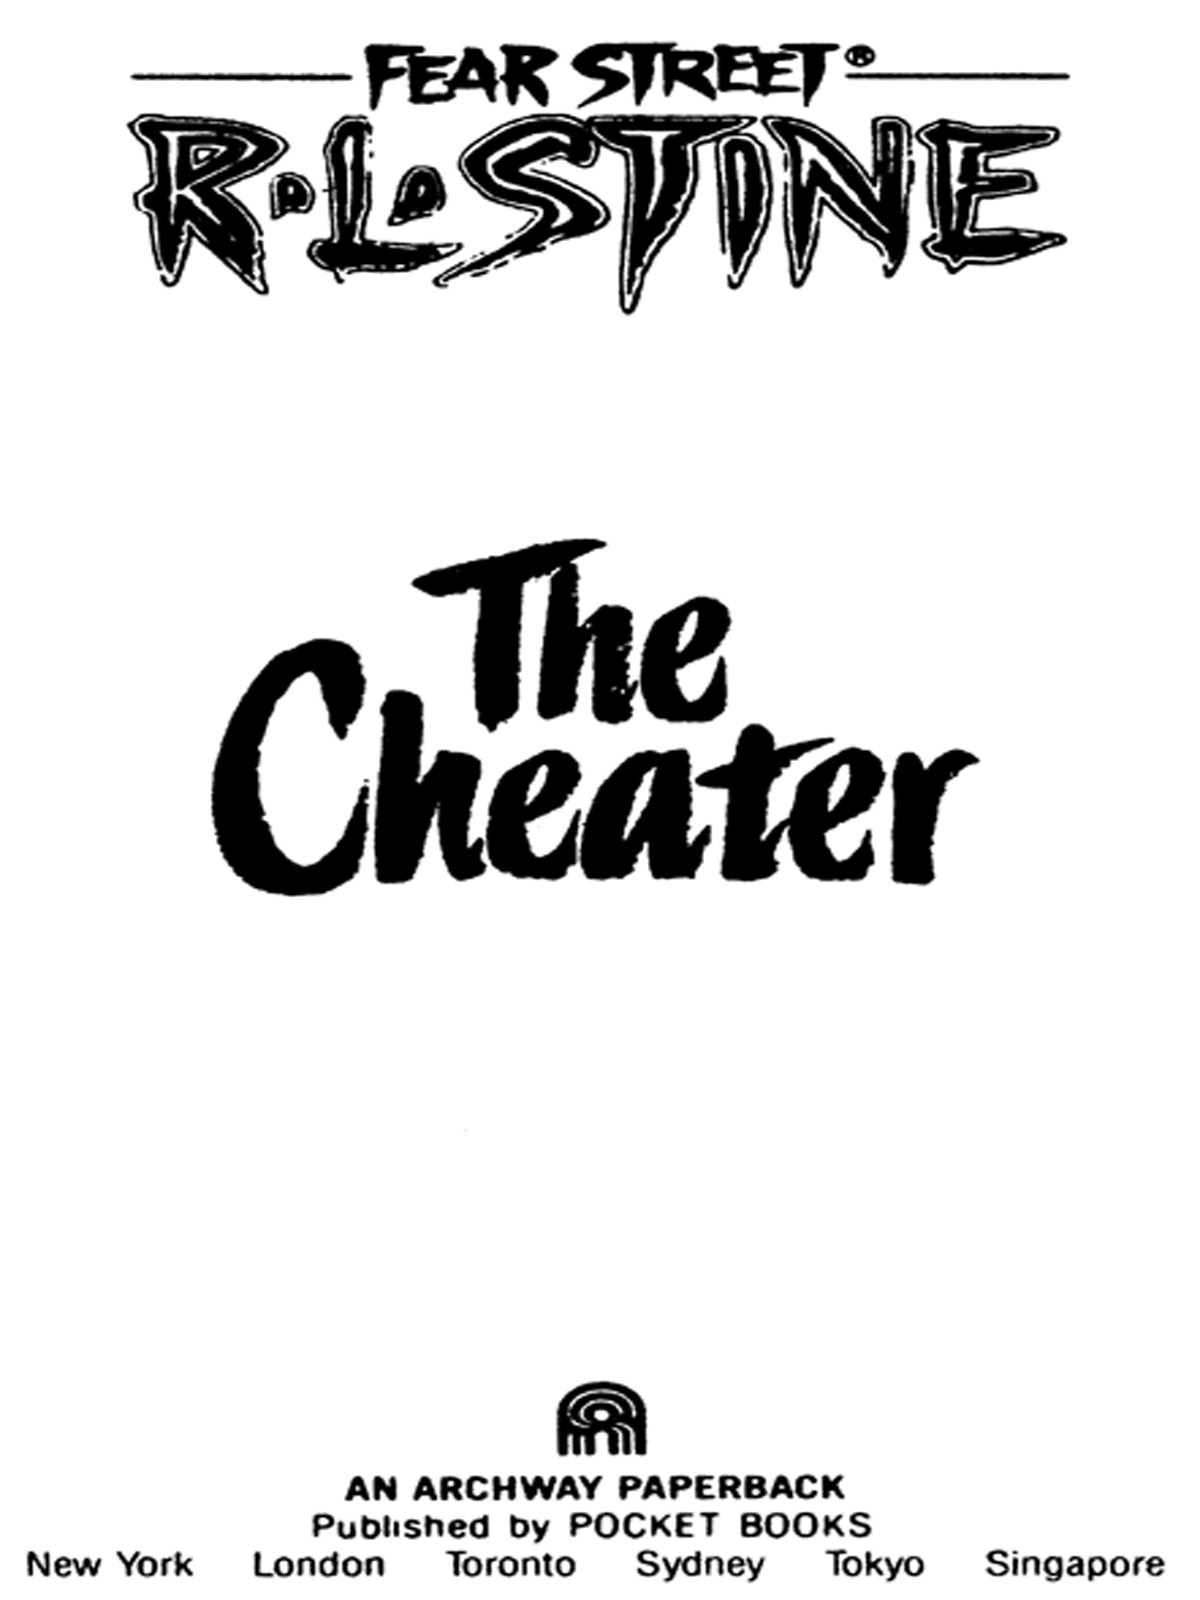 The Cheater (2009) by R.L. Stine